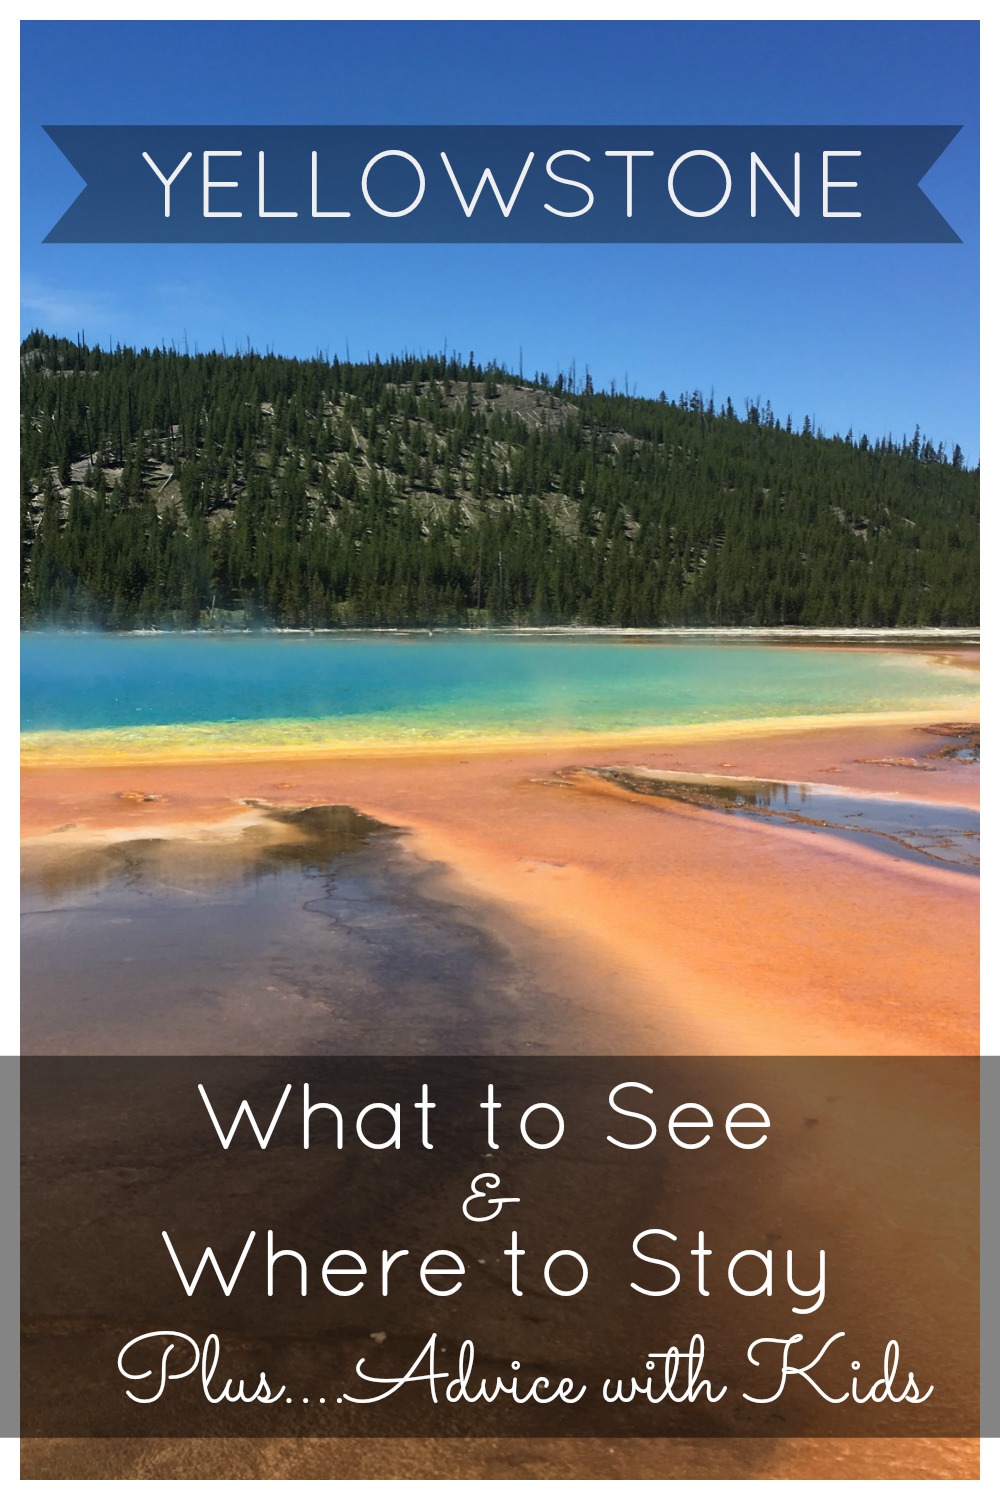 Yellowstone: Where to Stay and What to See